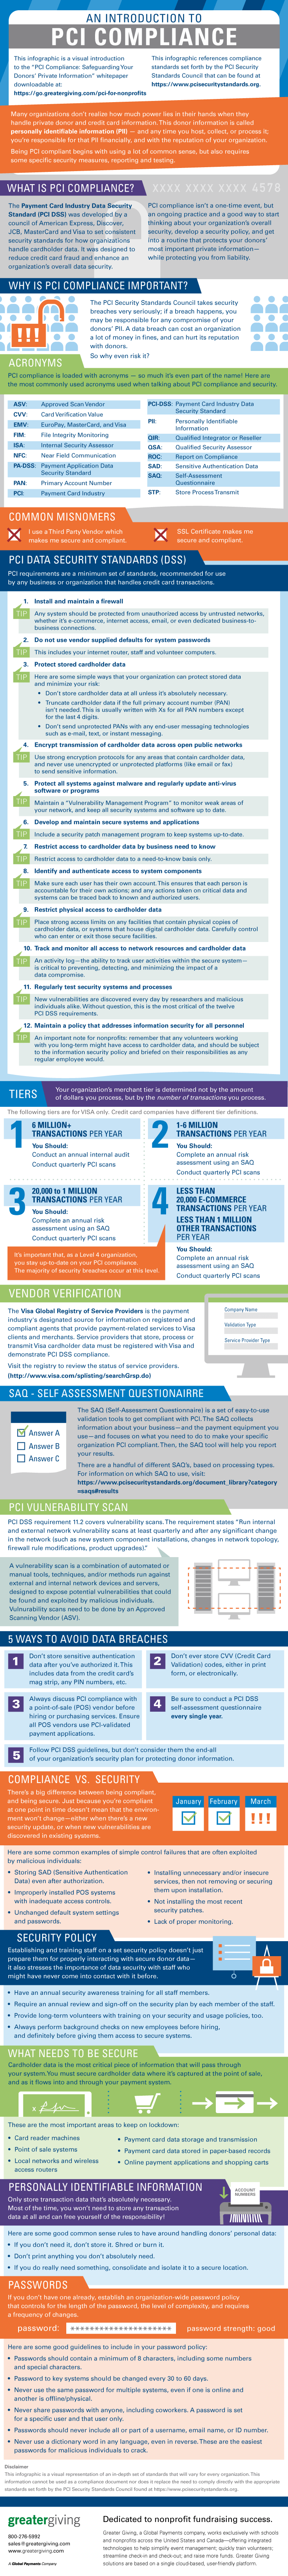 [INFOGRAPHIC] An Introduction to PCI Compliance